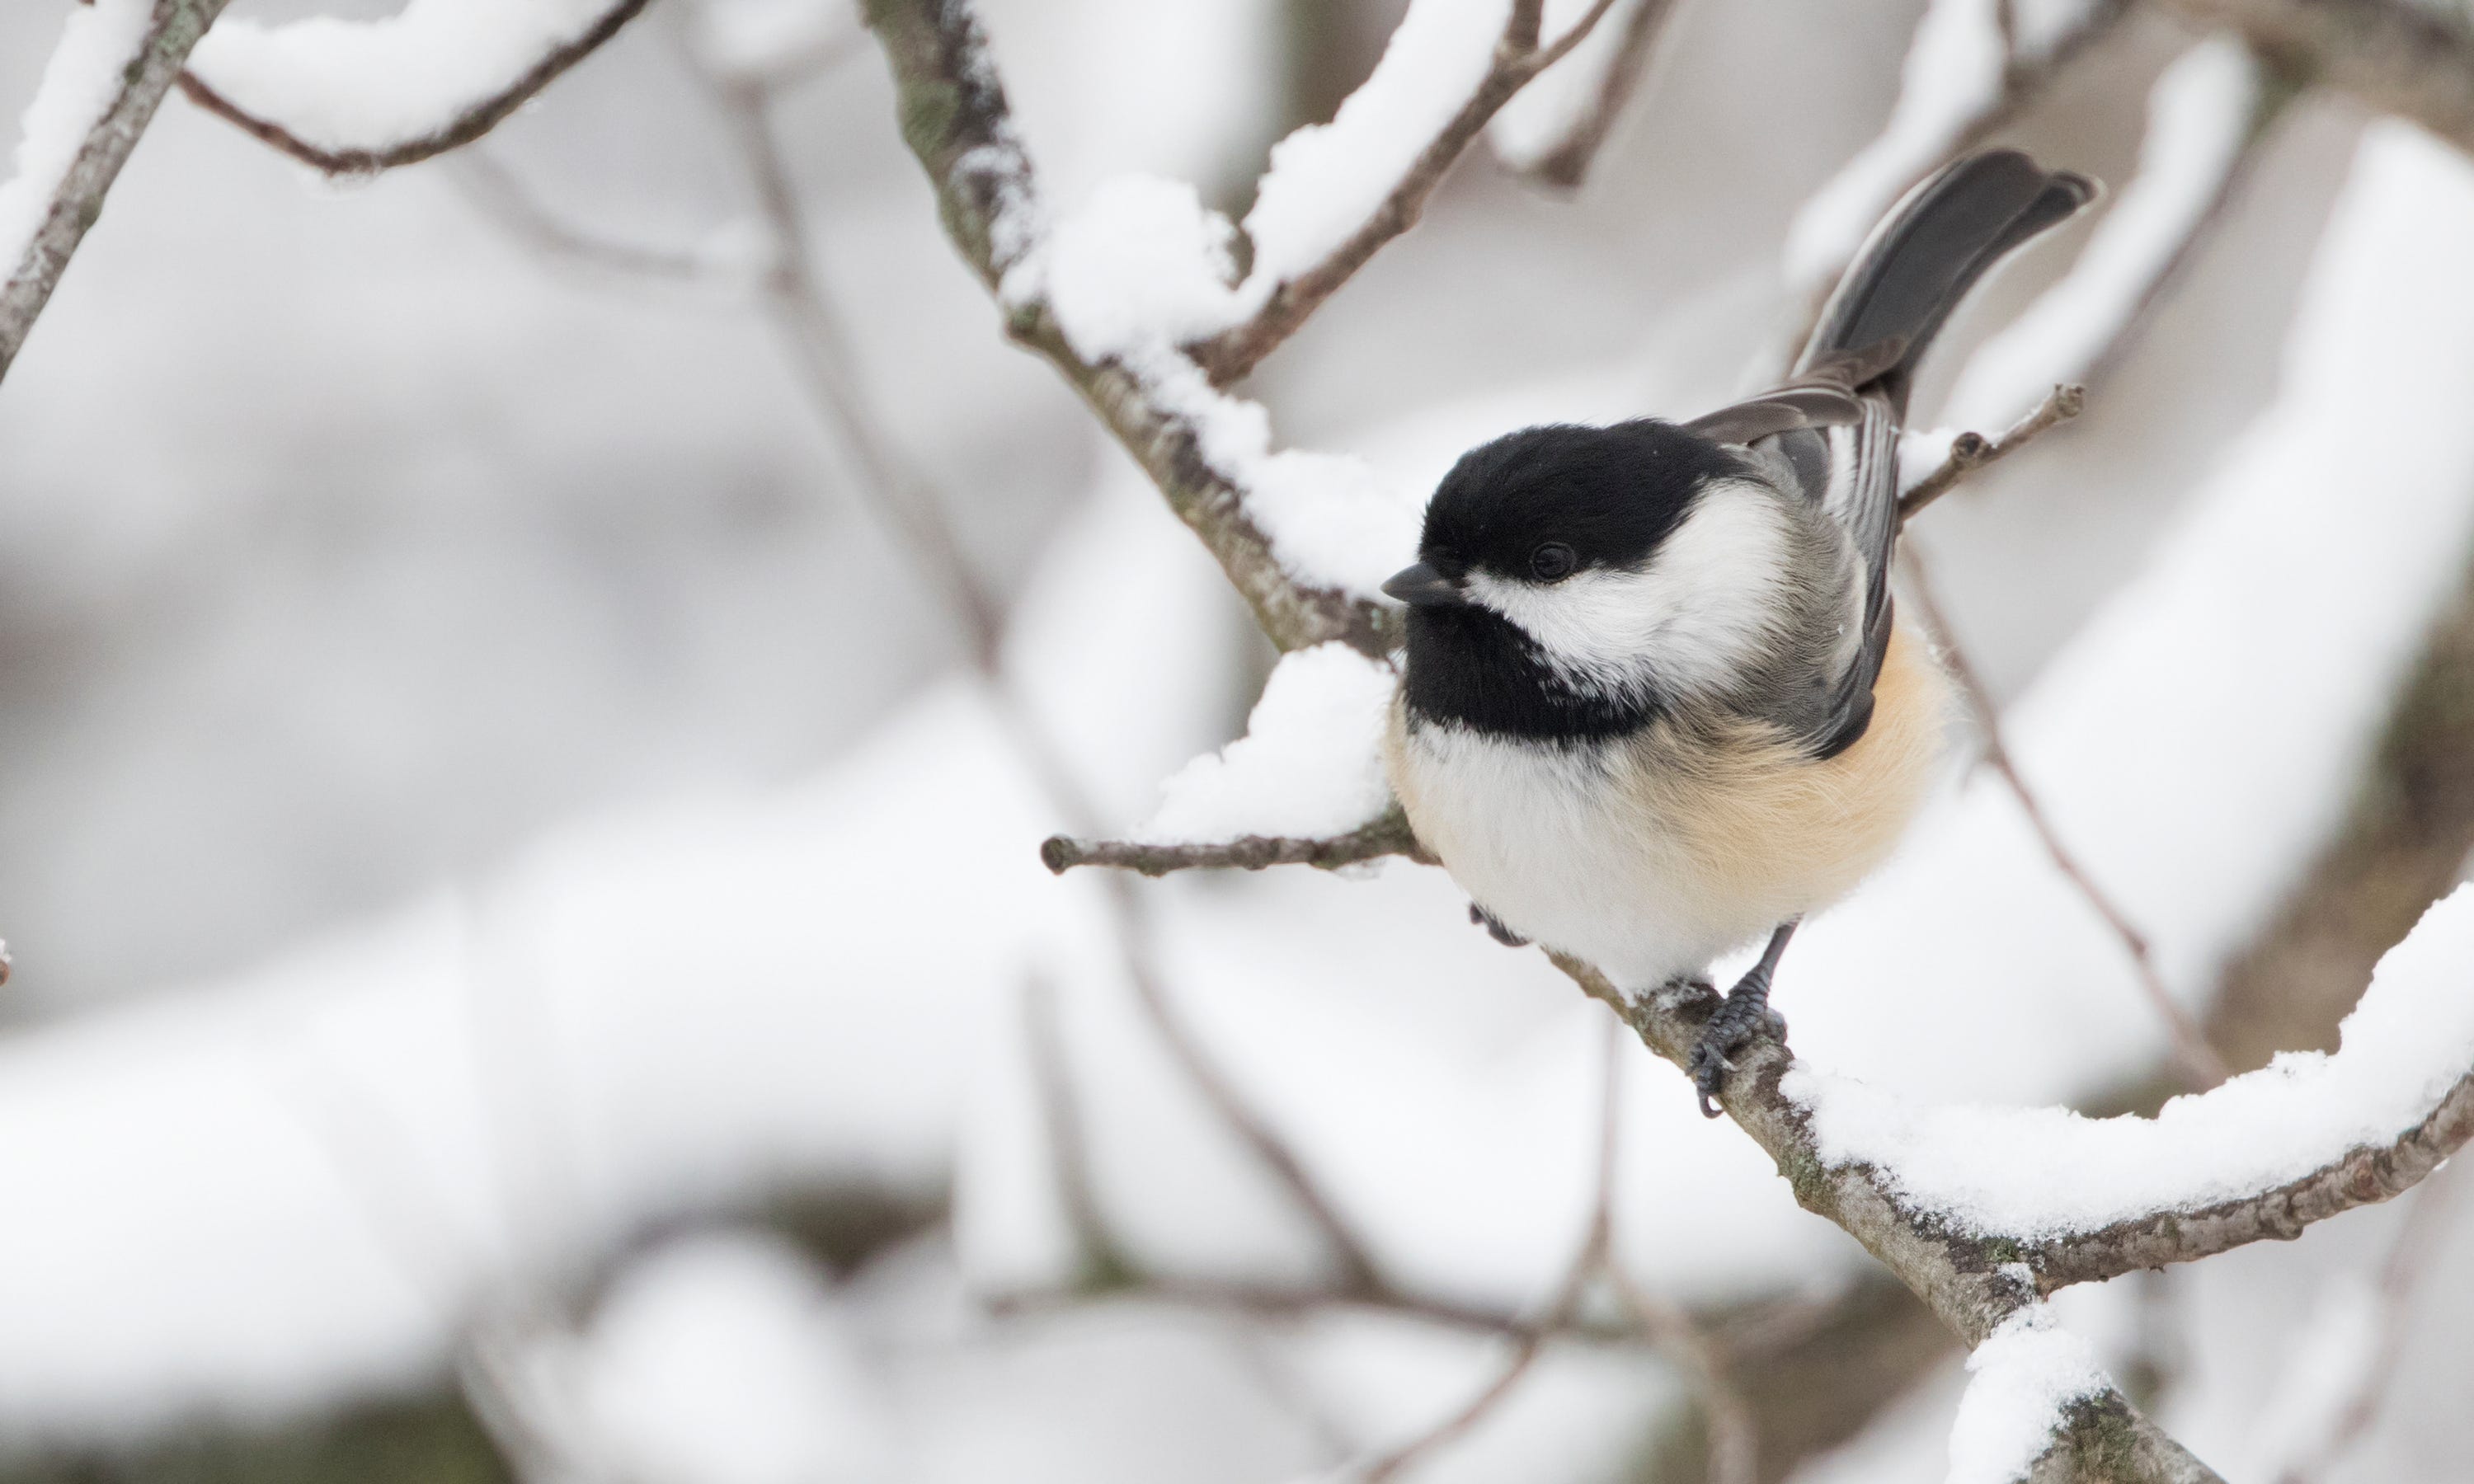 A small black and white bird standing on a tree branch and surrounded by snow.